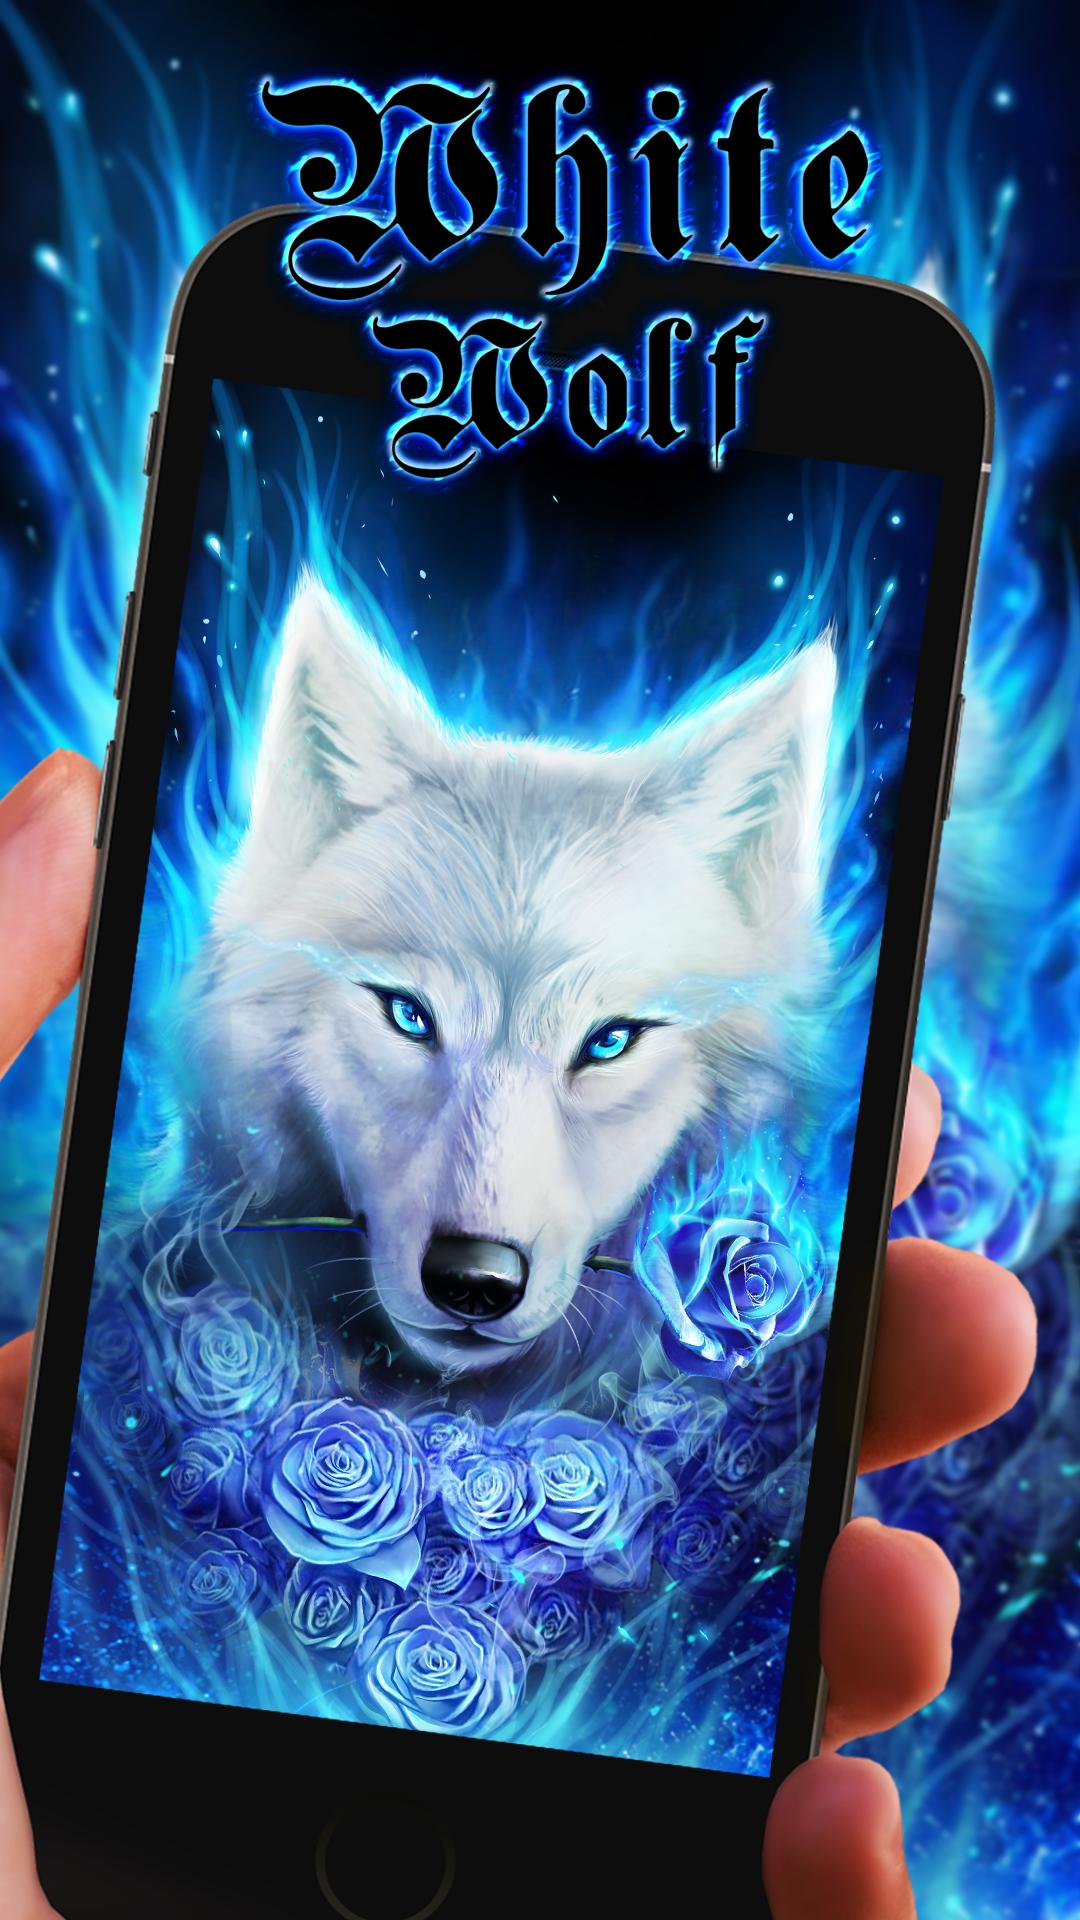 About Night Sky Wolf Live Wallpaper Google Play version   Apptopia